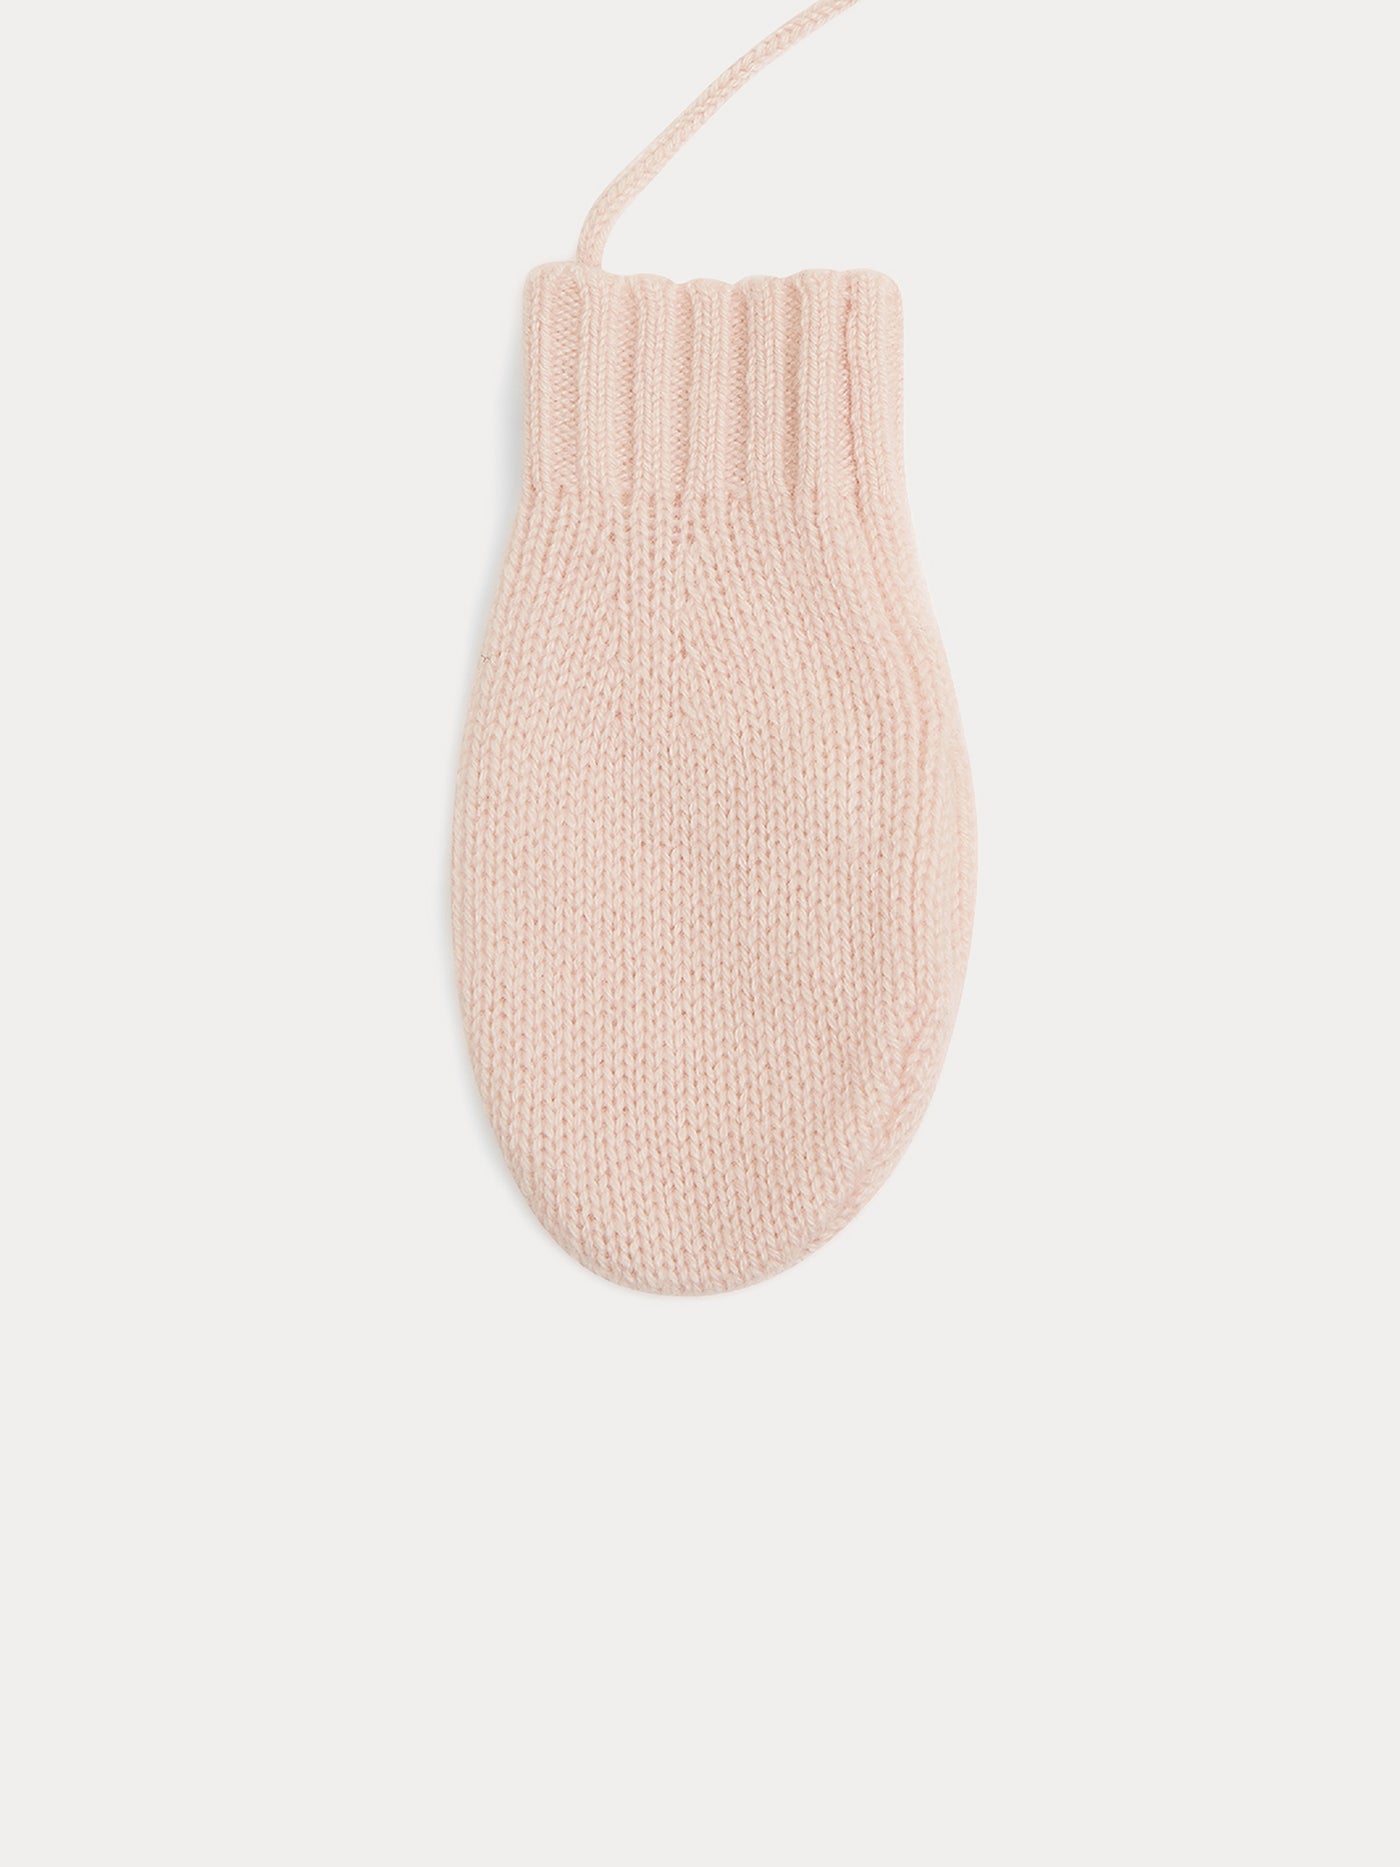 Babies' mittens pale pink